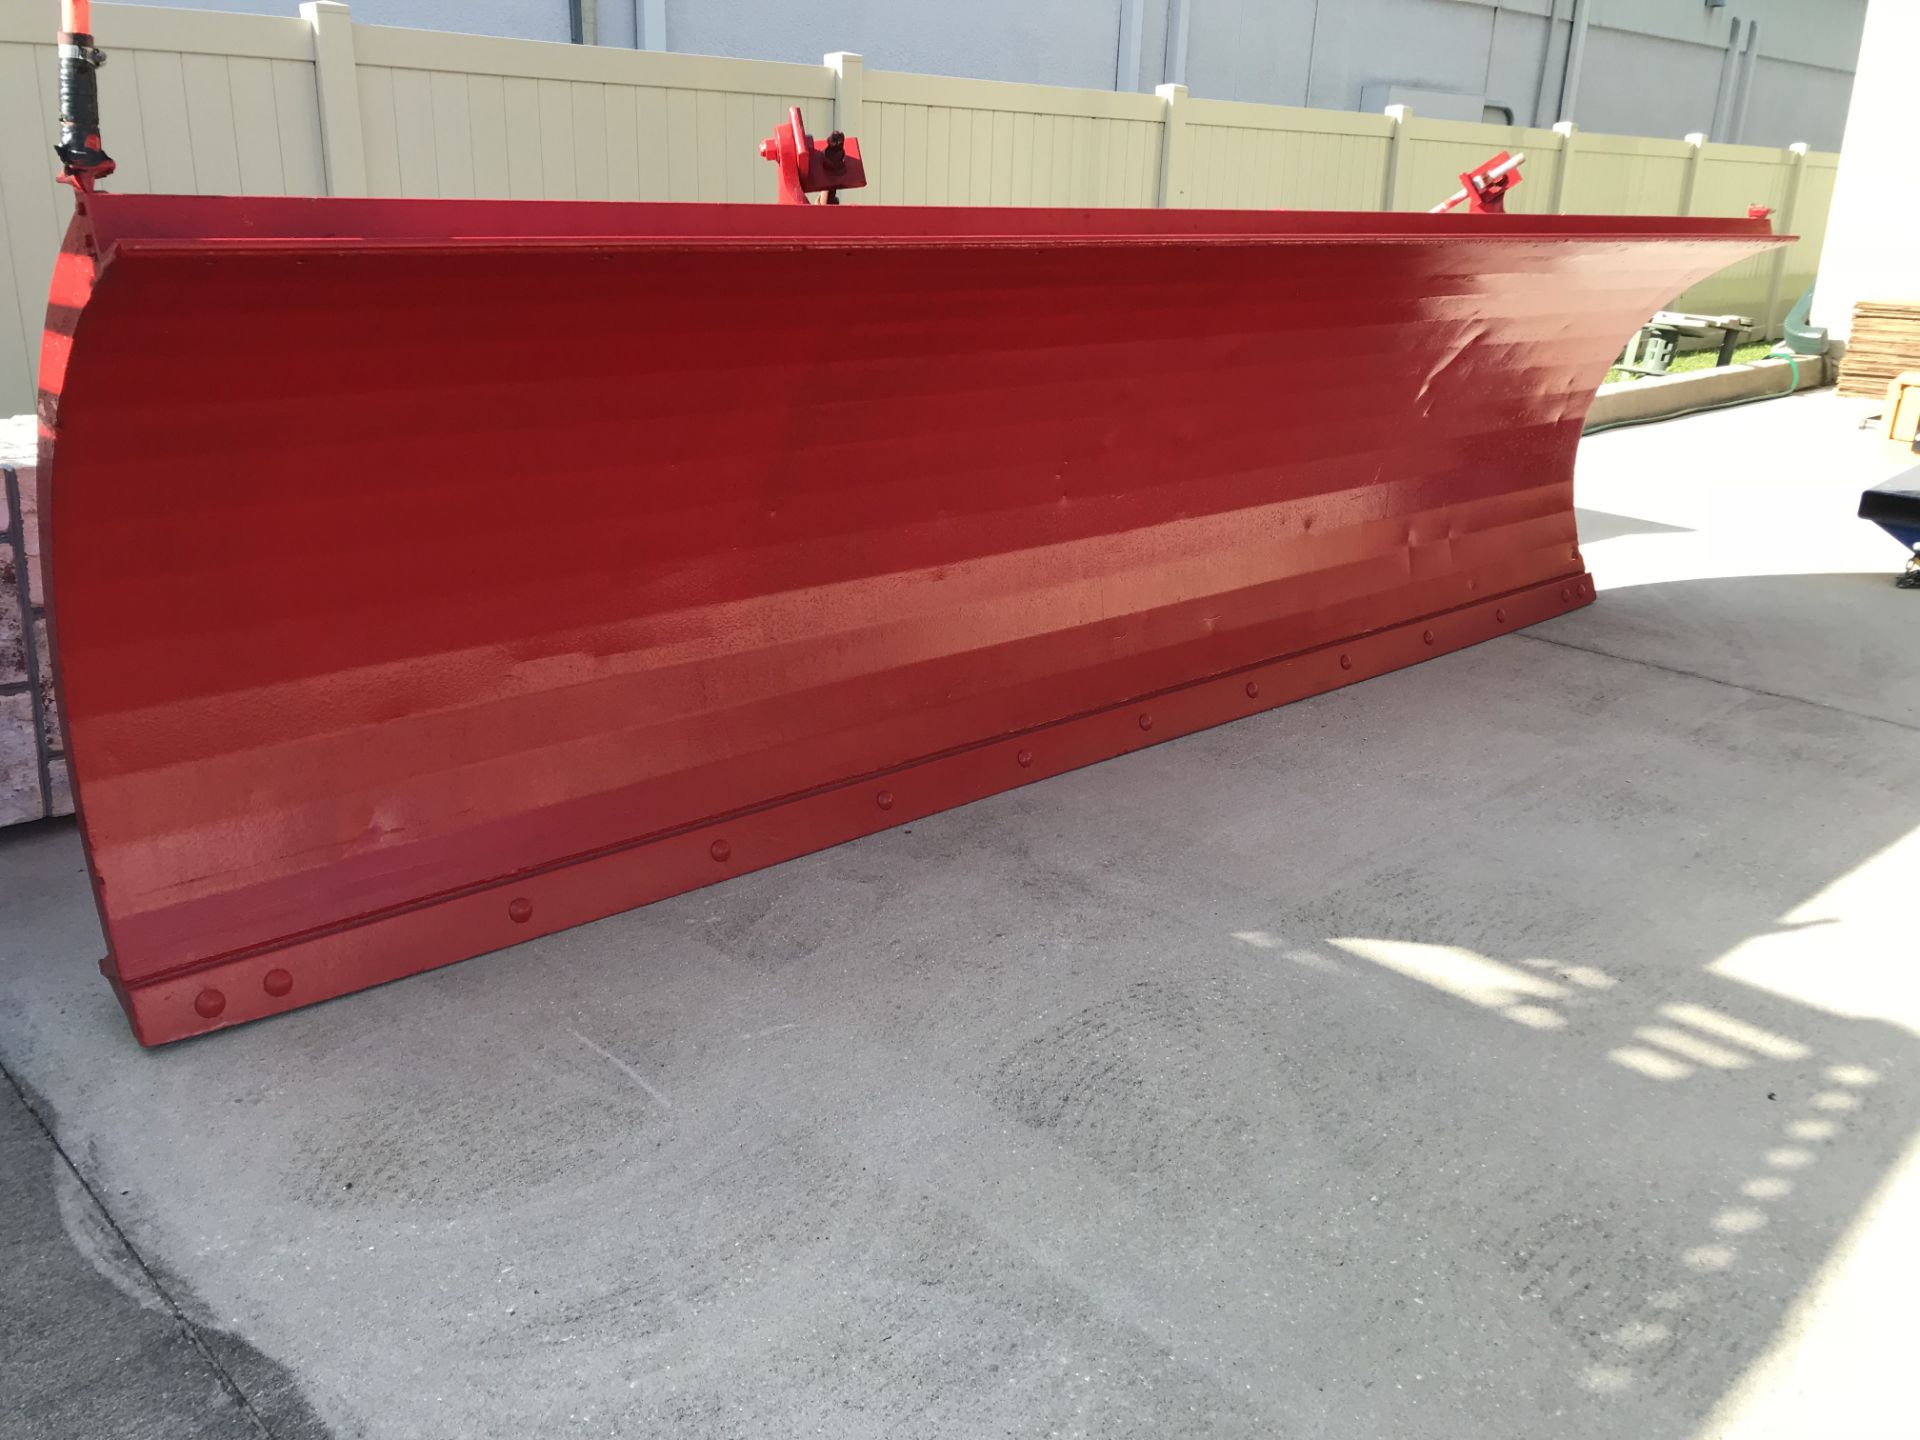 11' COMMERCIAL HYDRAULIC SNOW PLOW ATTACHMENT